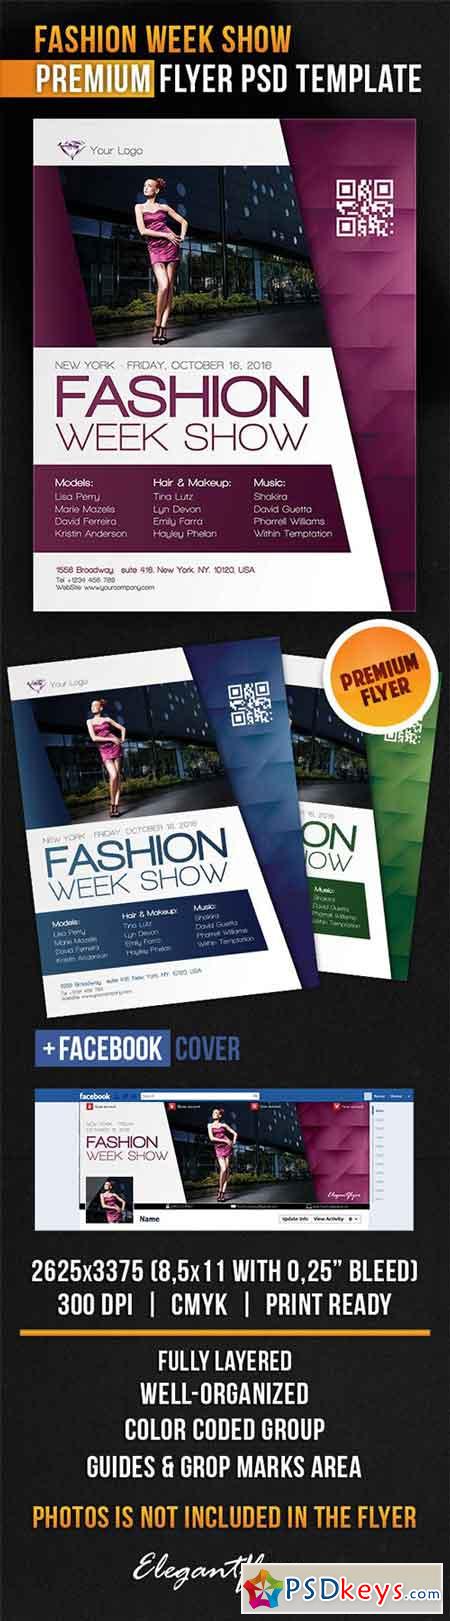 Fashion Week Show Flyer PSD Template + Facebook Cover